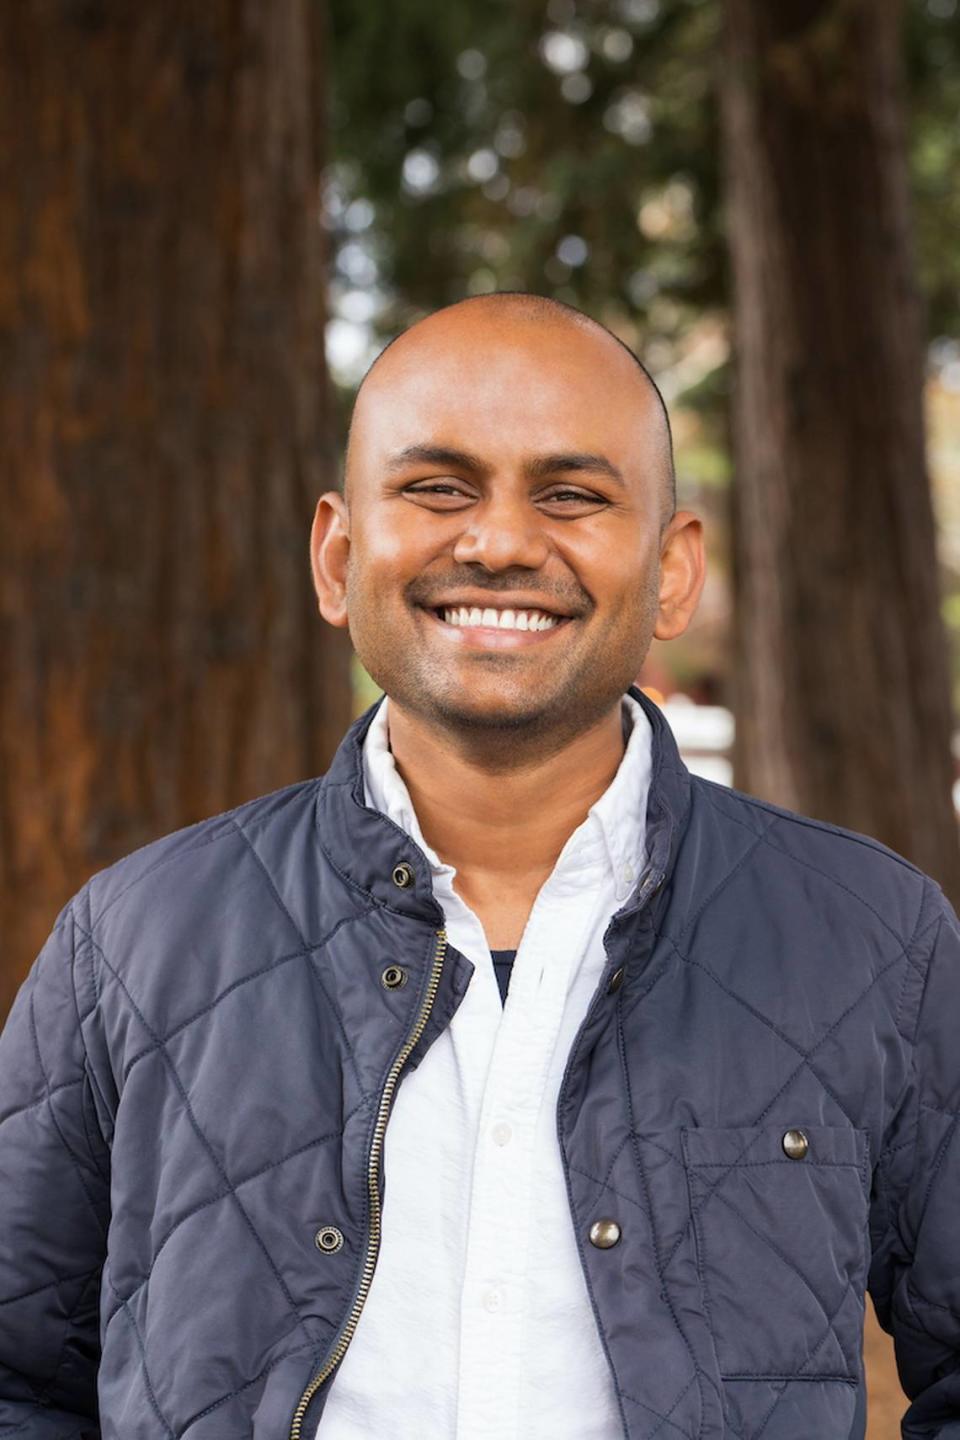 Pradeep Elankumaran, co-founder and CEO of Farmstead, a “cloud” grocery store that allows customers to order groceries online.